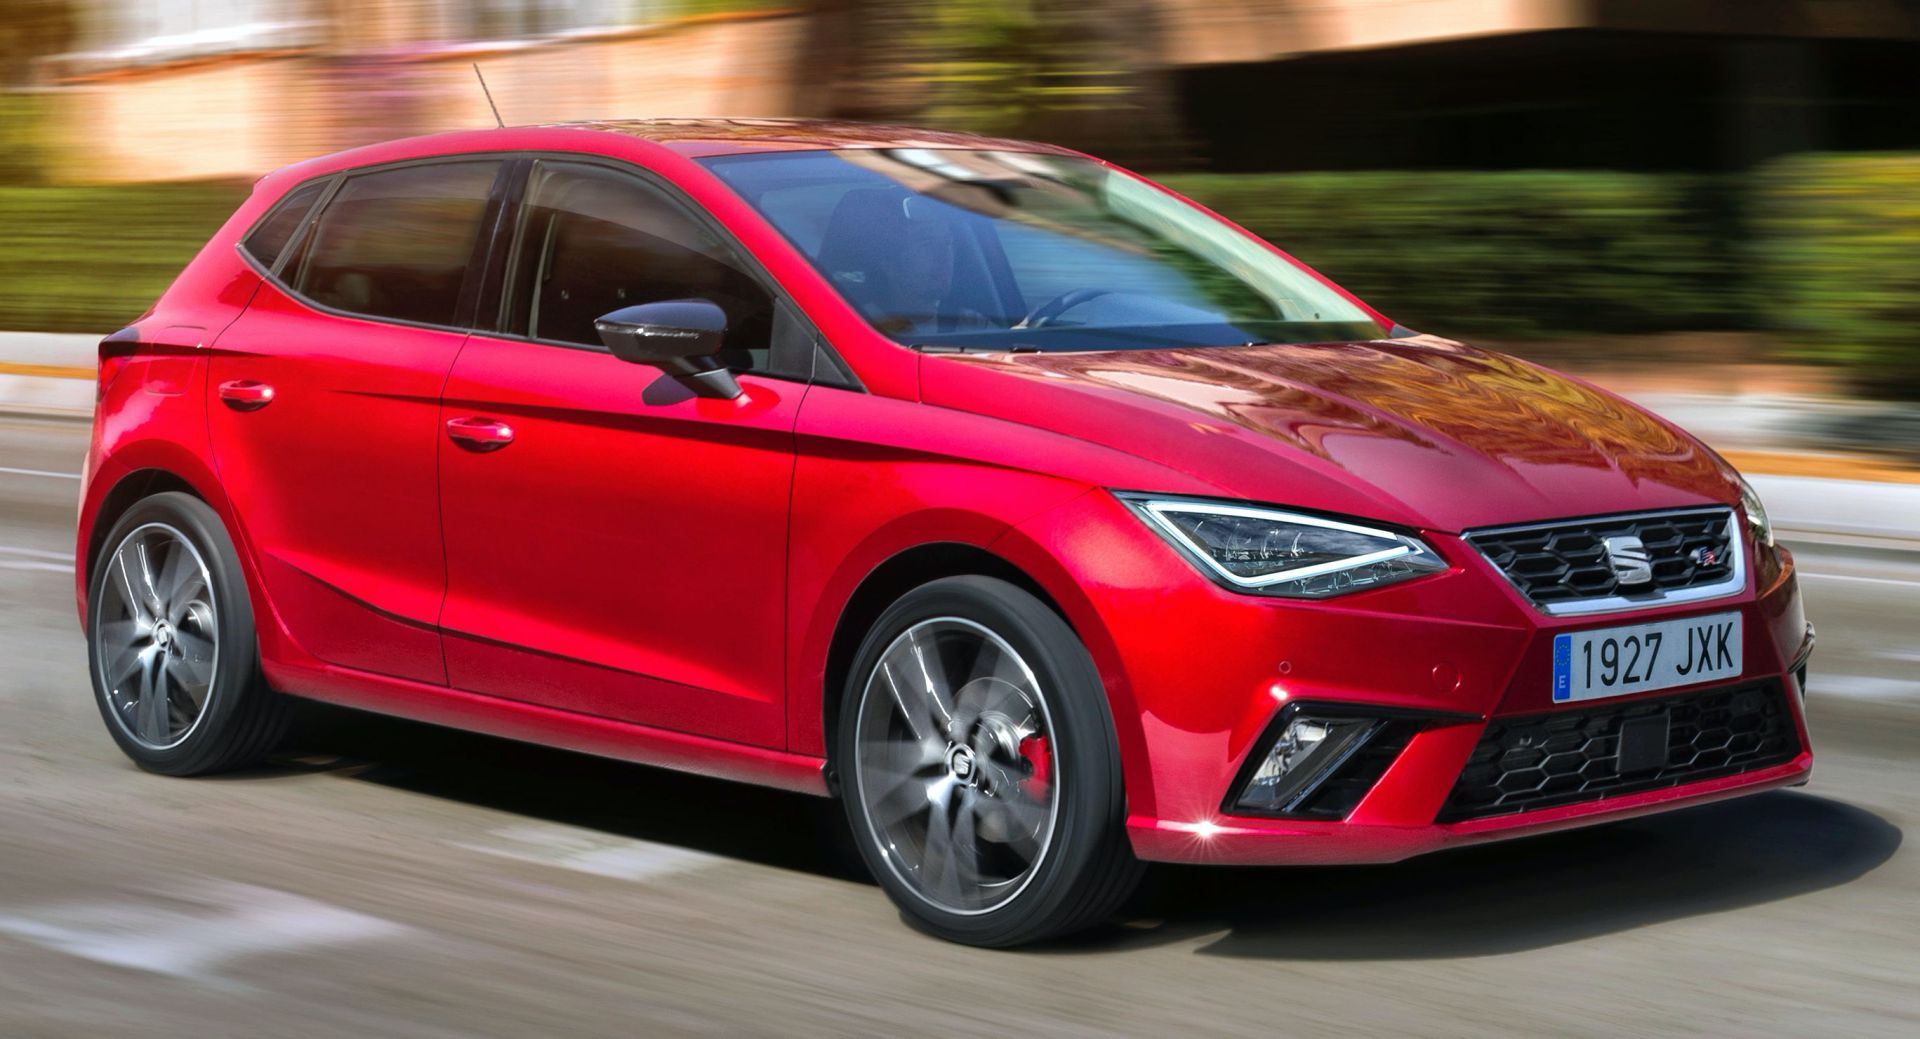 Hopes 148 HP Ibiza Make You Forget About Stillborn Cupra Model | Carscoops